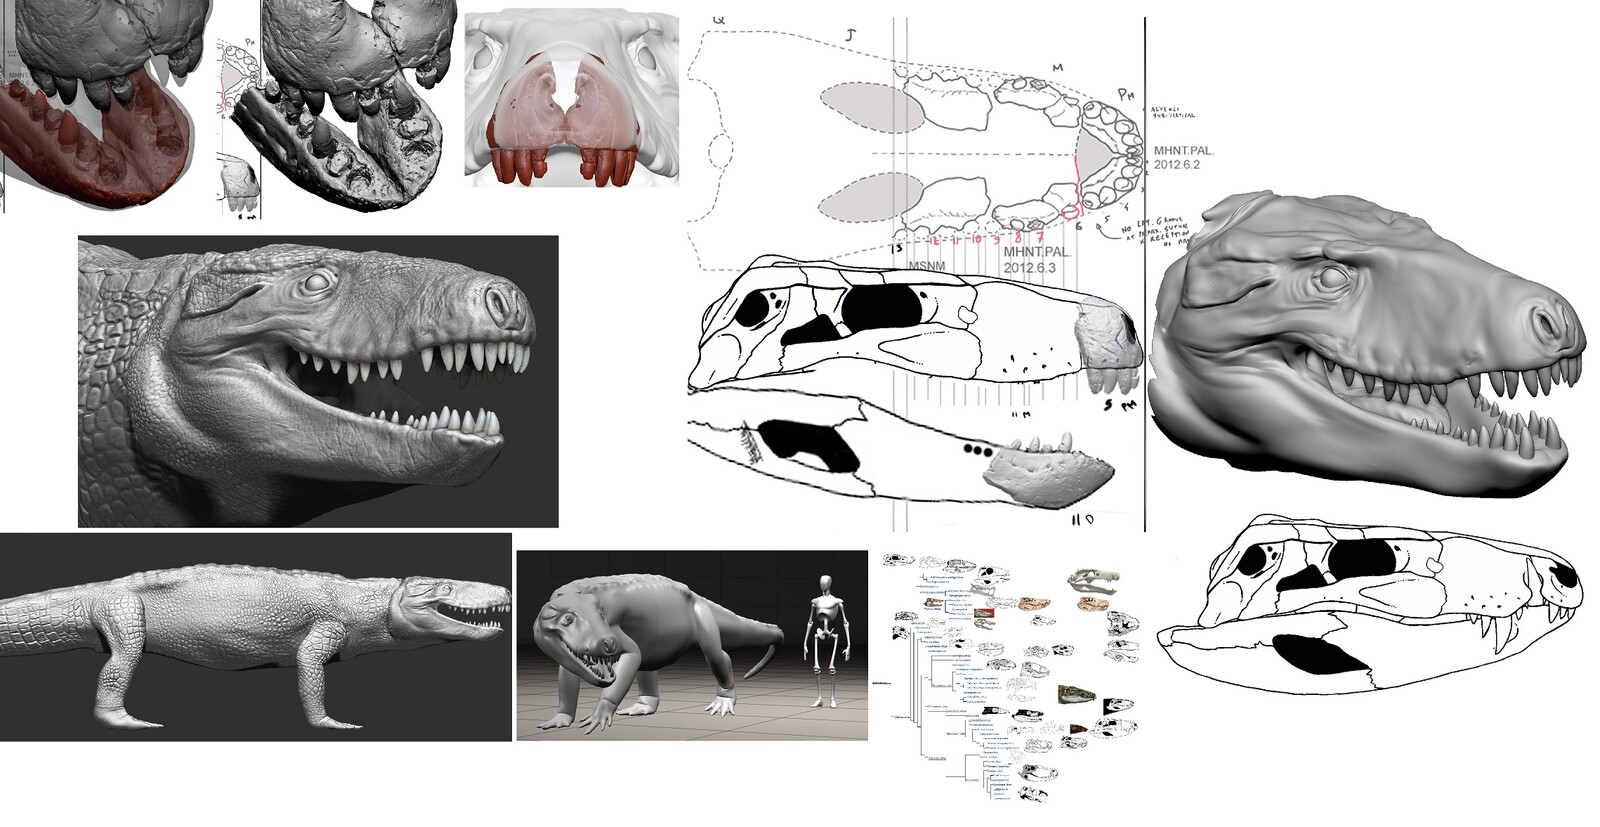 visual references and the virtualized version of the fossil